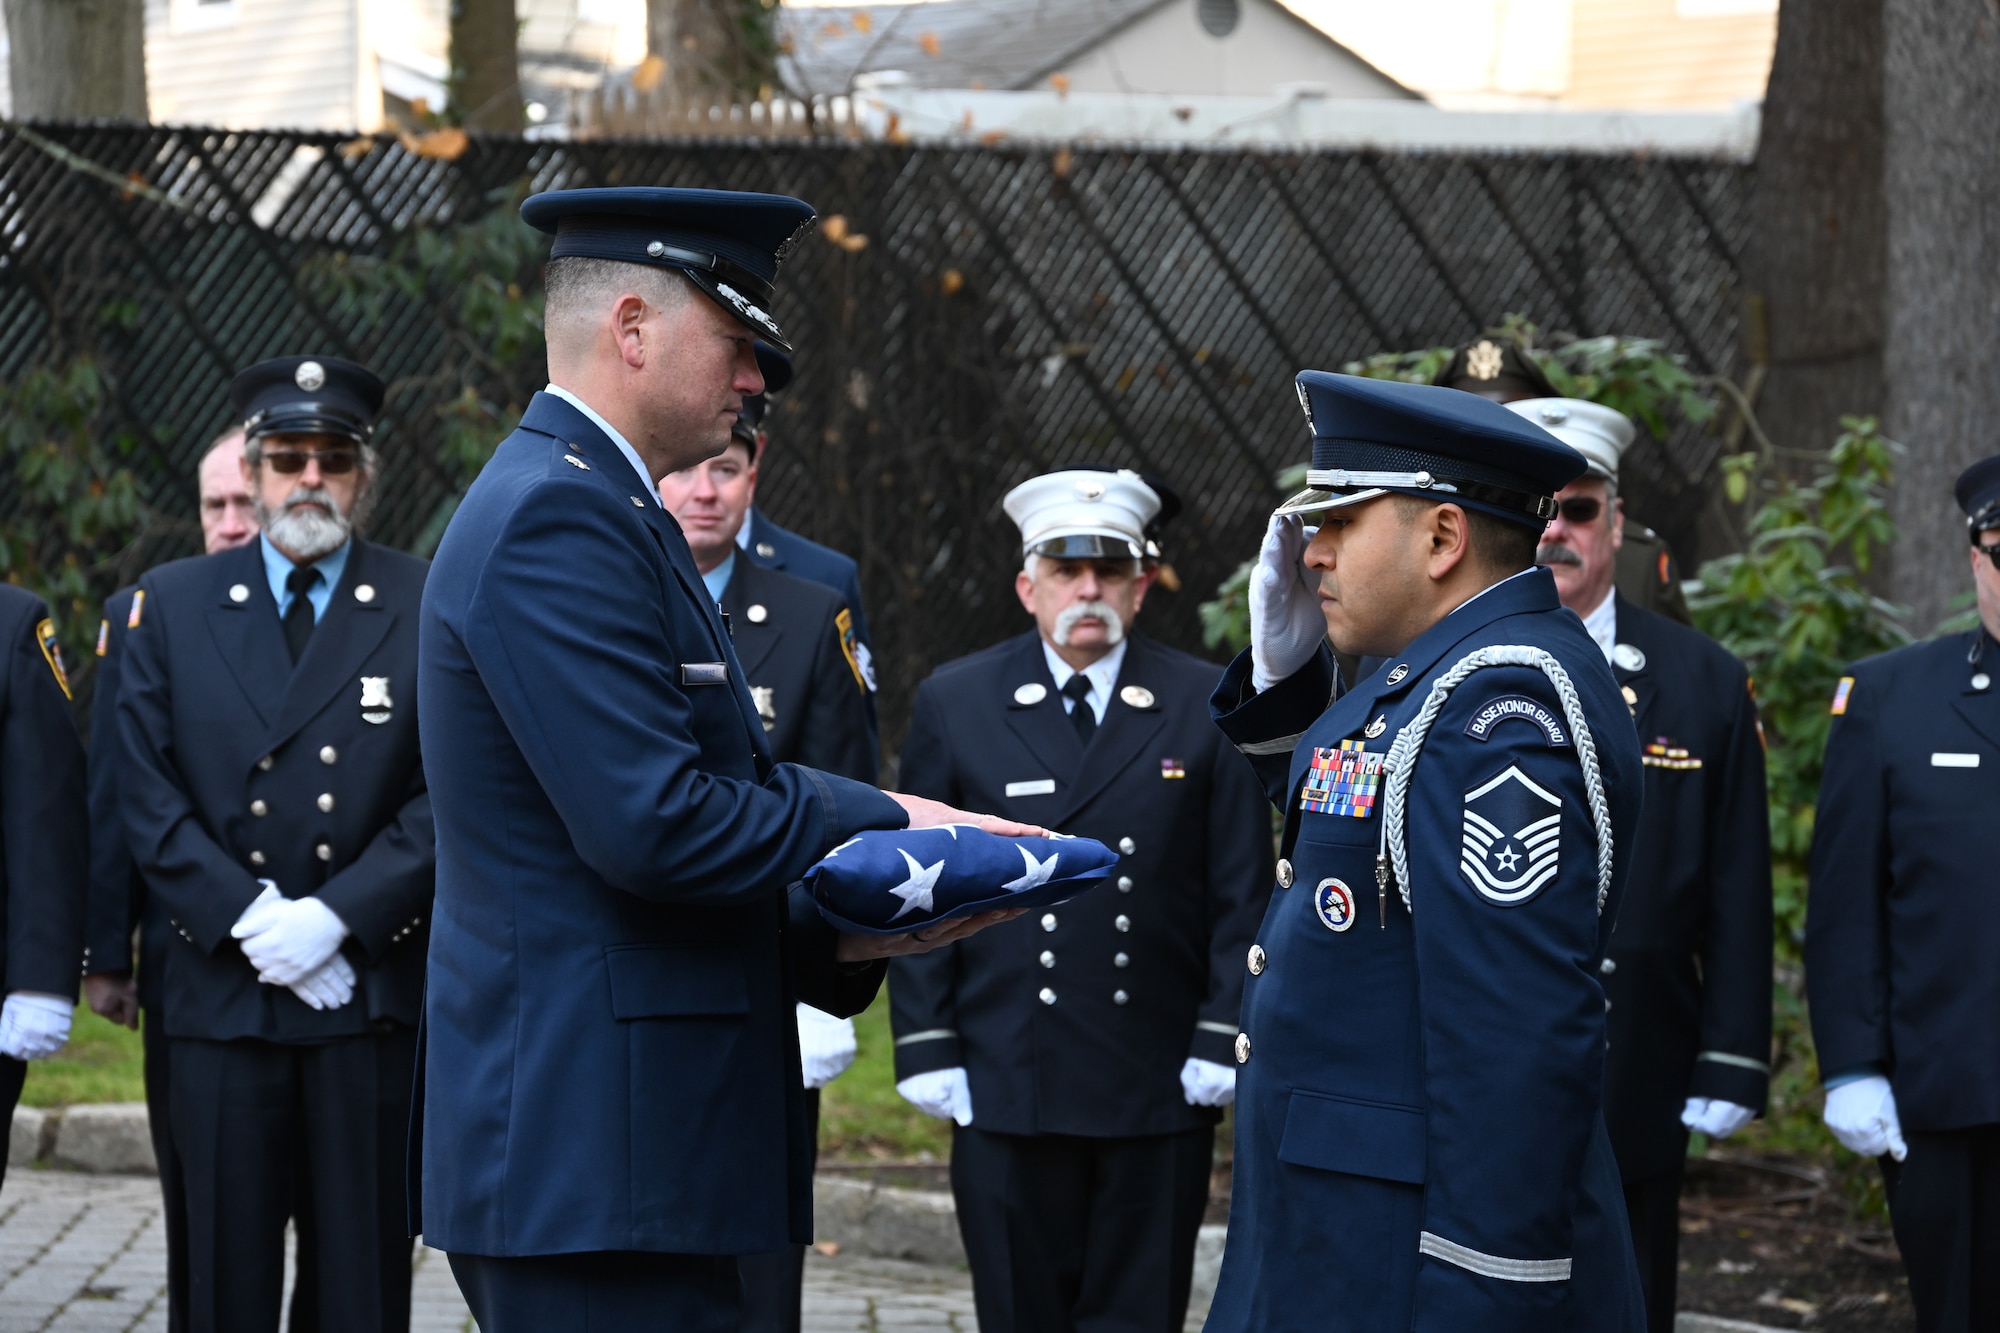 New York Air National Guard Master Sgt. Edison Aguilar, the 105th Airlift Wing honor guard program manager, salutes a memorial flag after presenting it to U.S. Air Force Lt. Col. Benjamin Thomas, the commander of the 105th Civil Engineer Squadron, during a memorial service for former Air Guard Tech. Sgt. Mario Scaduto in Yonkers, New York, Dec. 16, 2023. This was one of 1,990 military funerals New York Air Guard honor guards expected to provide in 2023.